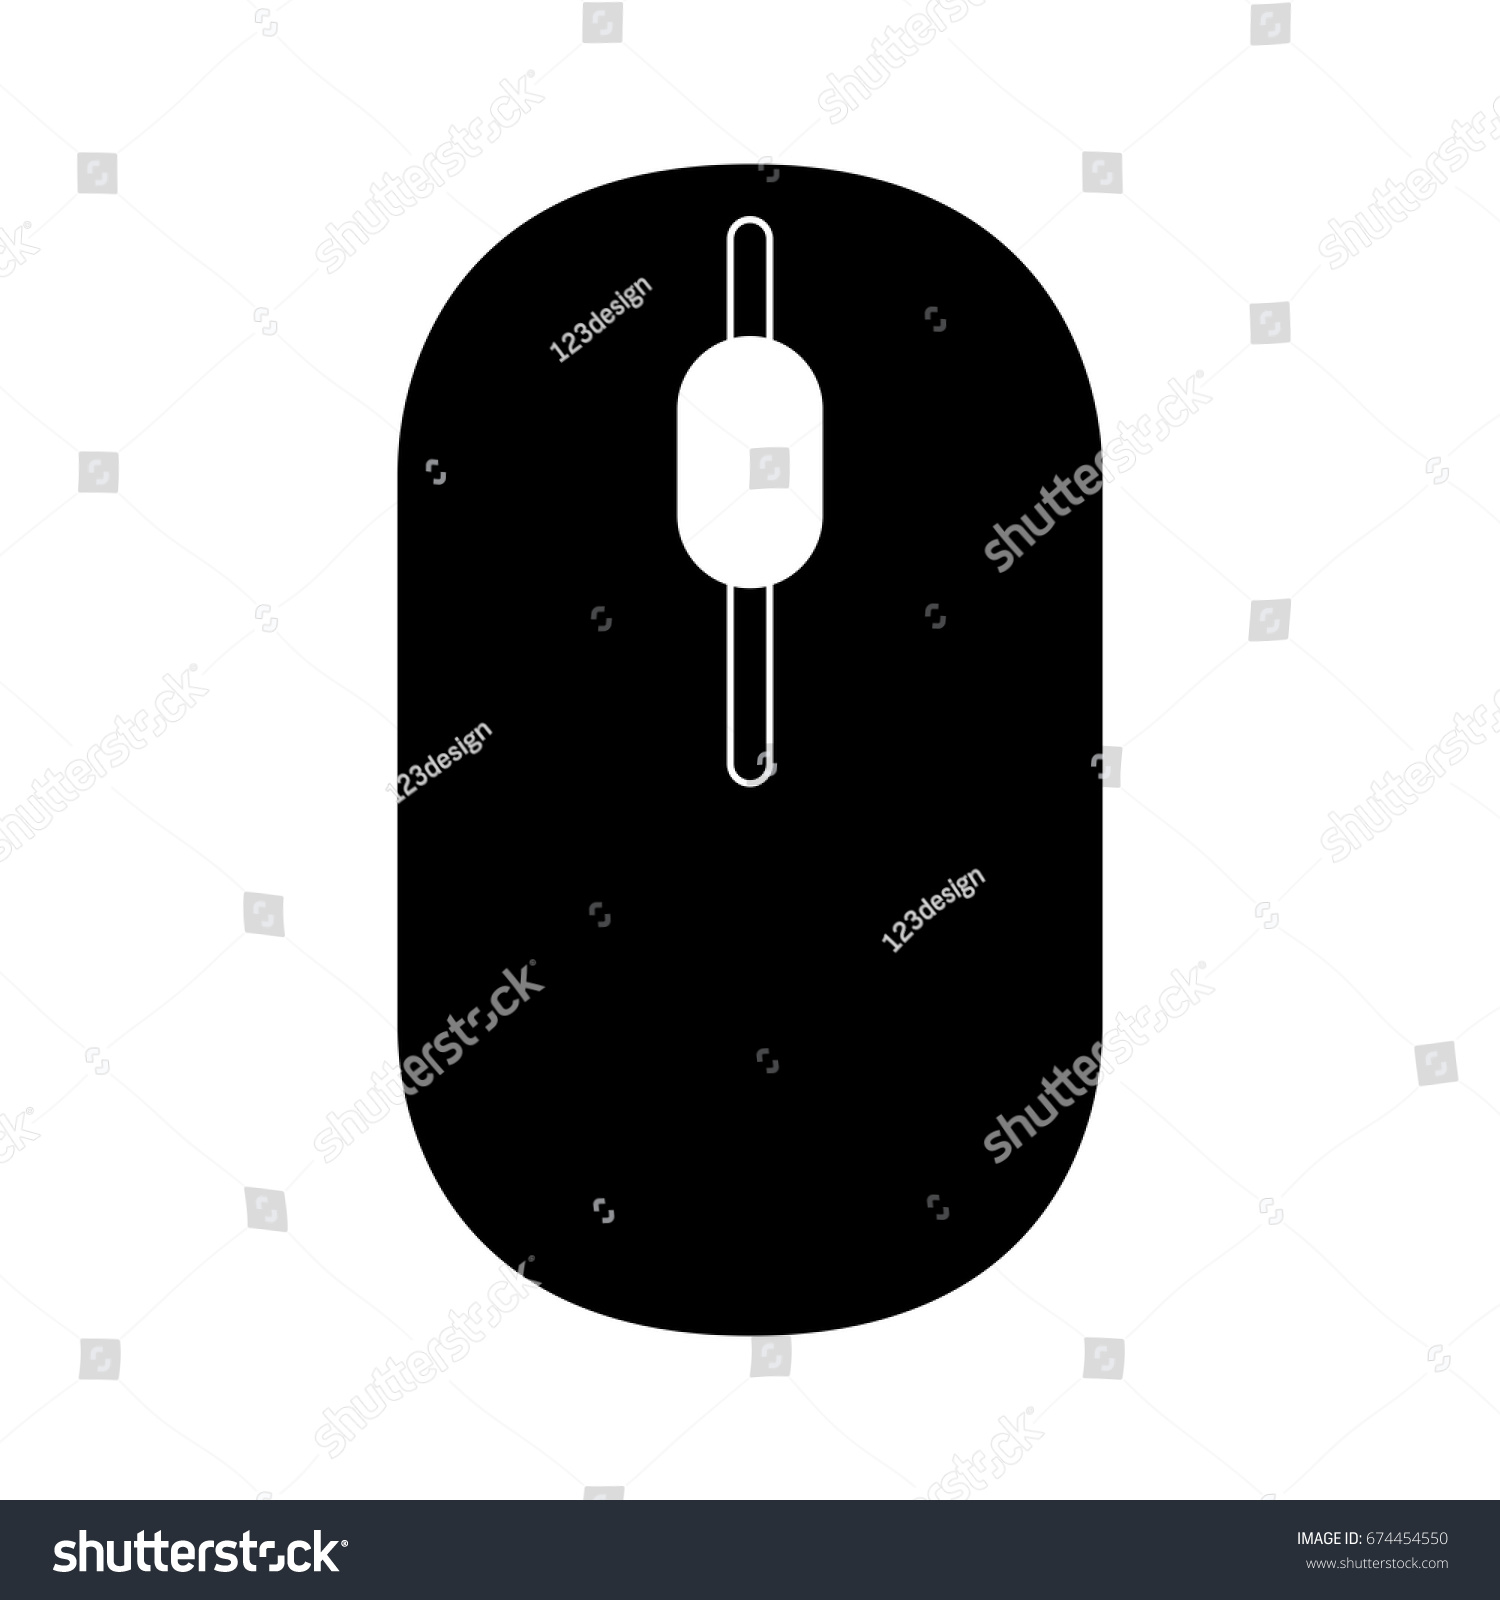 Mouse Clicker Icons Free Vector - Download Free Vector Art, Stock 